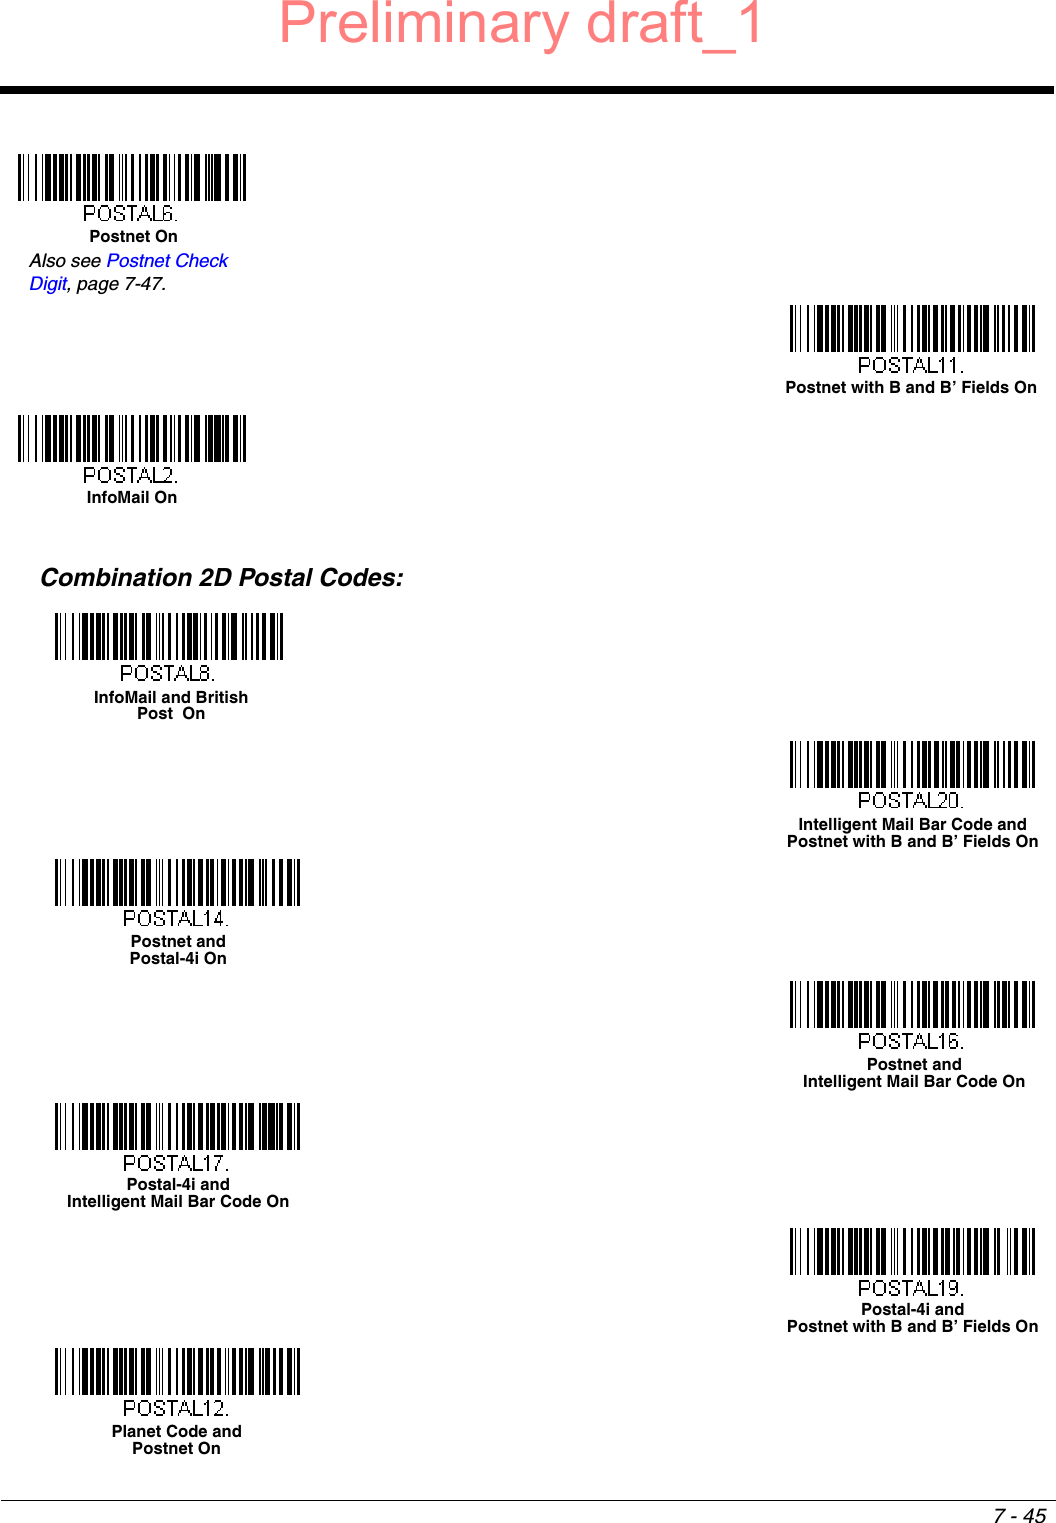 7 - 45Combination 2D Postal Codes:Postnet OnAlso see Postnet Check Digit, page 7-47.Postnet with B and B’ Fields OnInfoMail OnInfoMail and British Post  OnIntelligent Mail Bar Code and Postnet with B and B’ Fields OnPostnet and Postal-4i OnPostnet and Intelligent Mail Bar Code OnPostal-4i and Intelligent Mail Bar Code OnPostal-4i and Postnet with B and B’ Fields OnPlanet Code and Postnet OnPreliminary draft_1